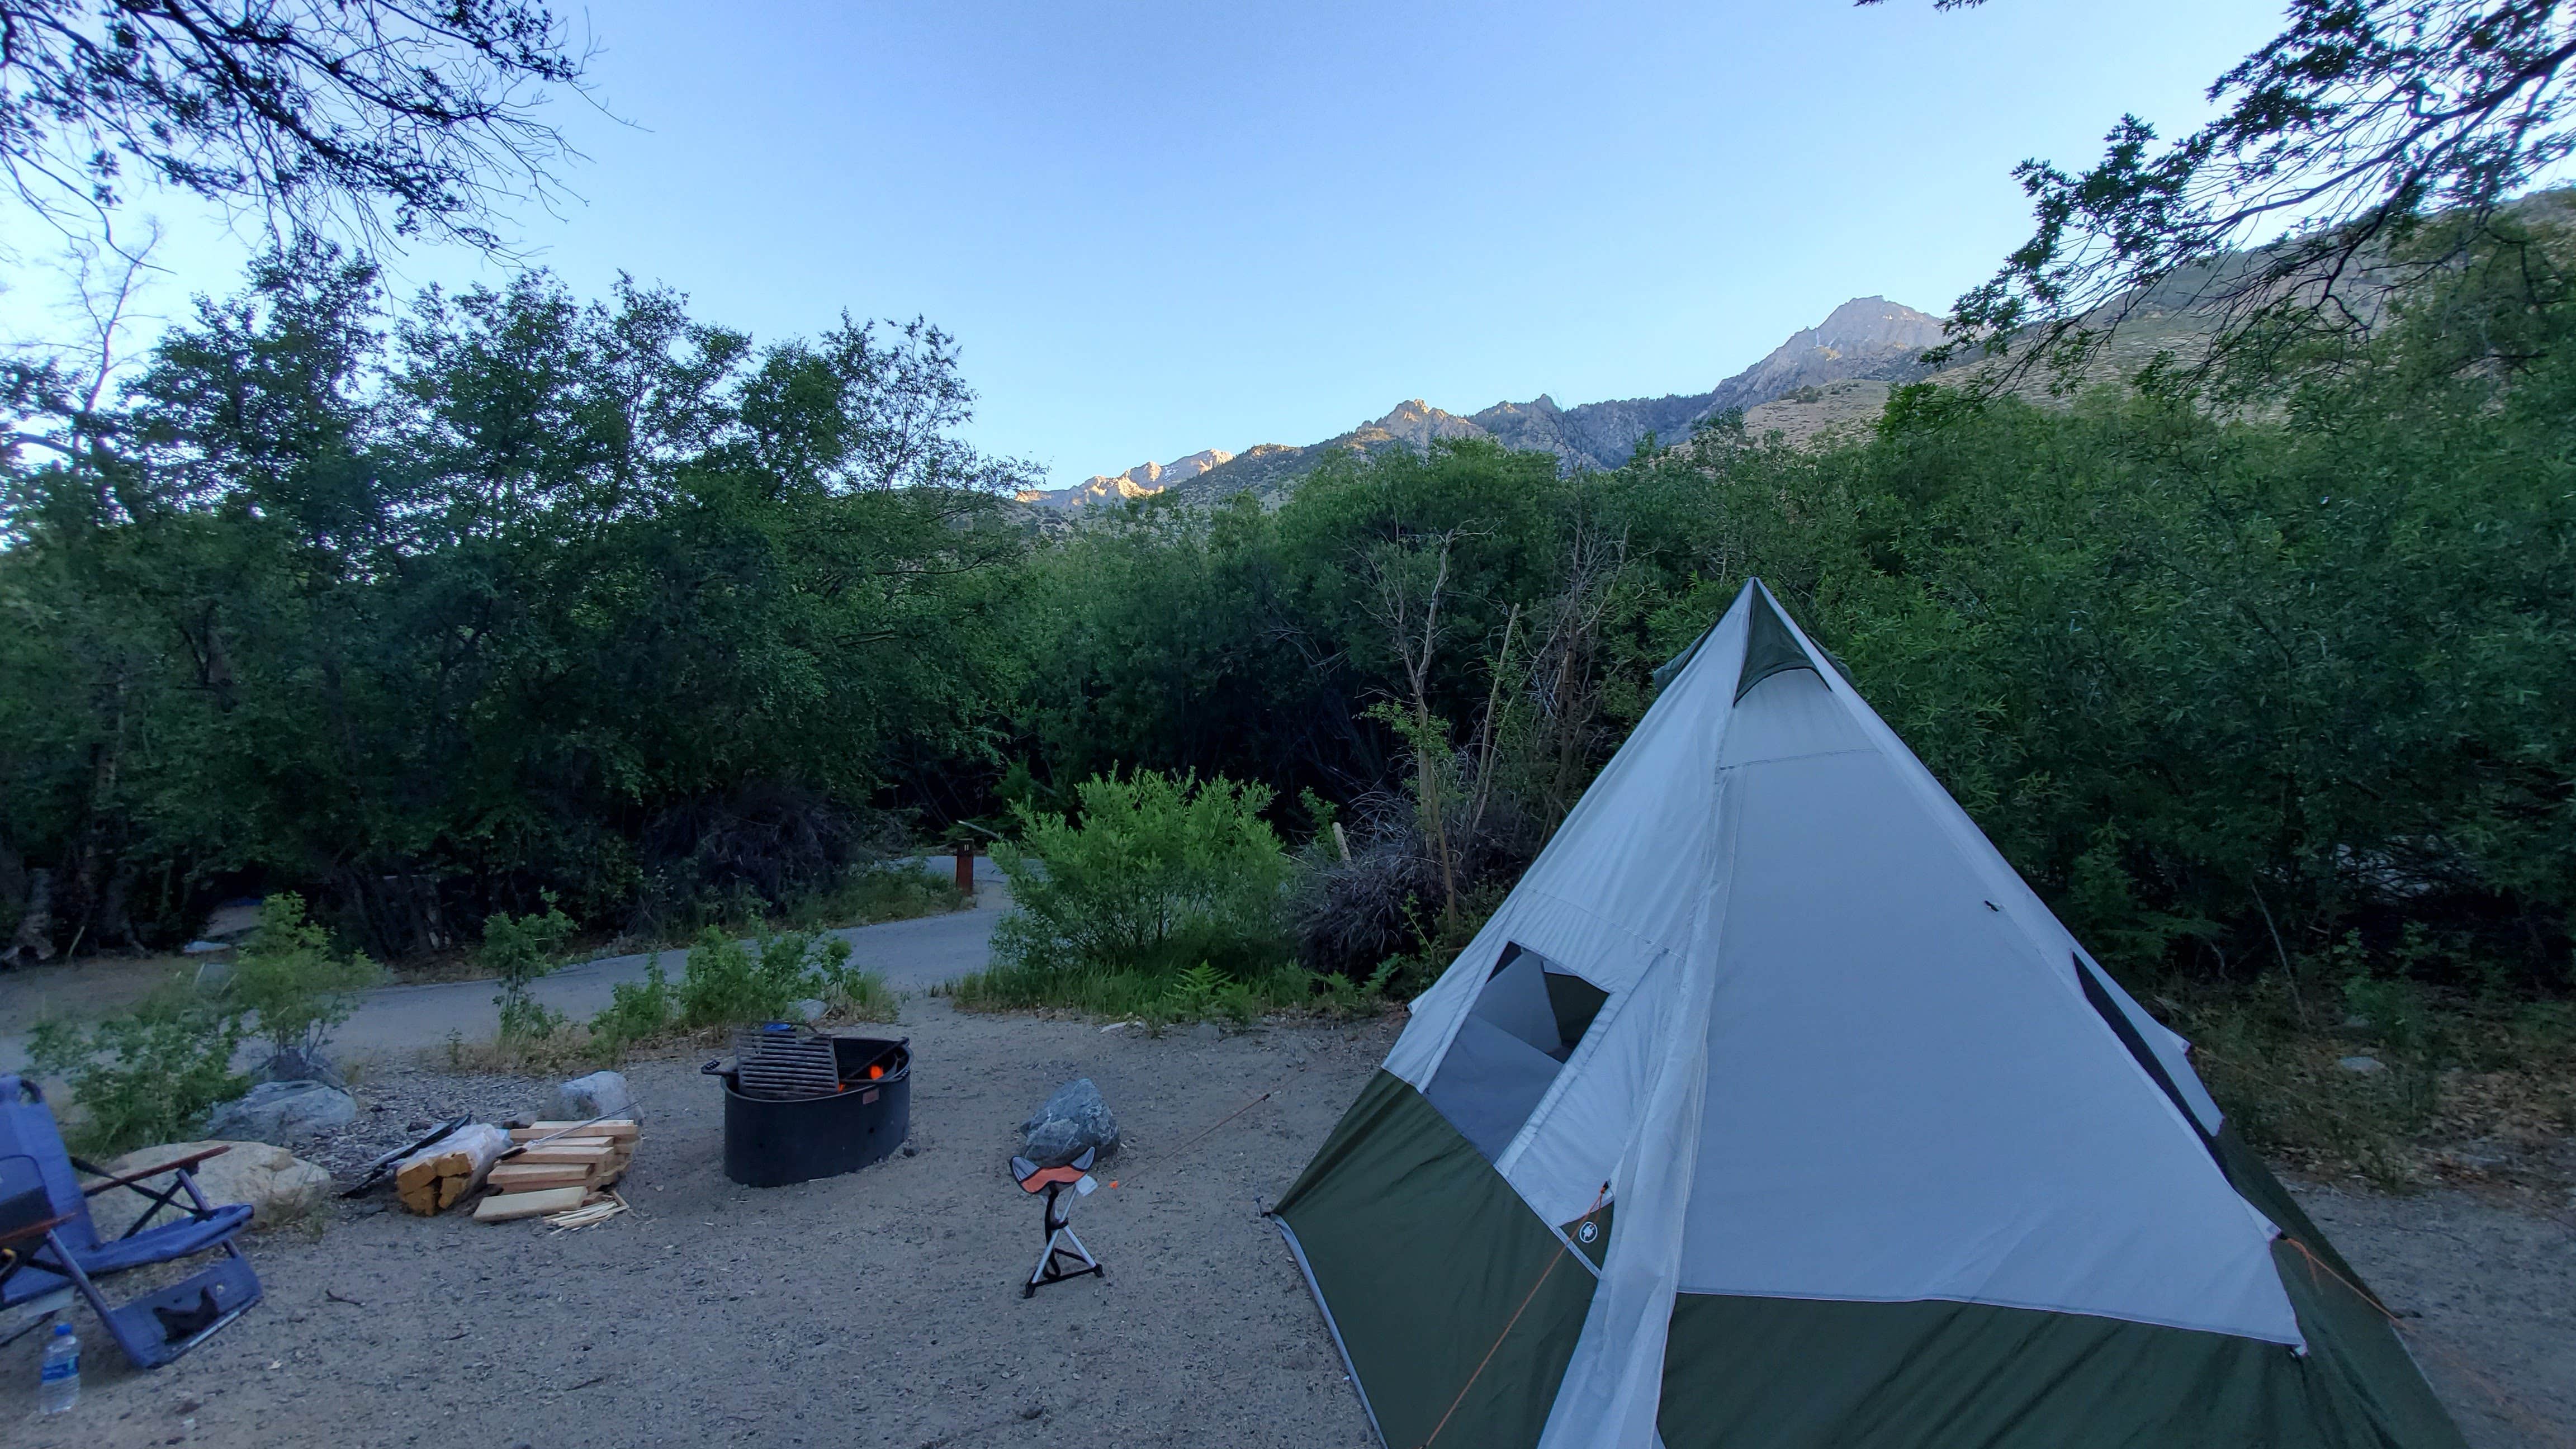 Typical campsite within the riparian corridor.